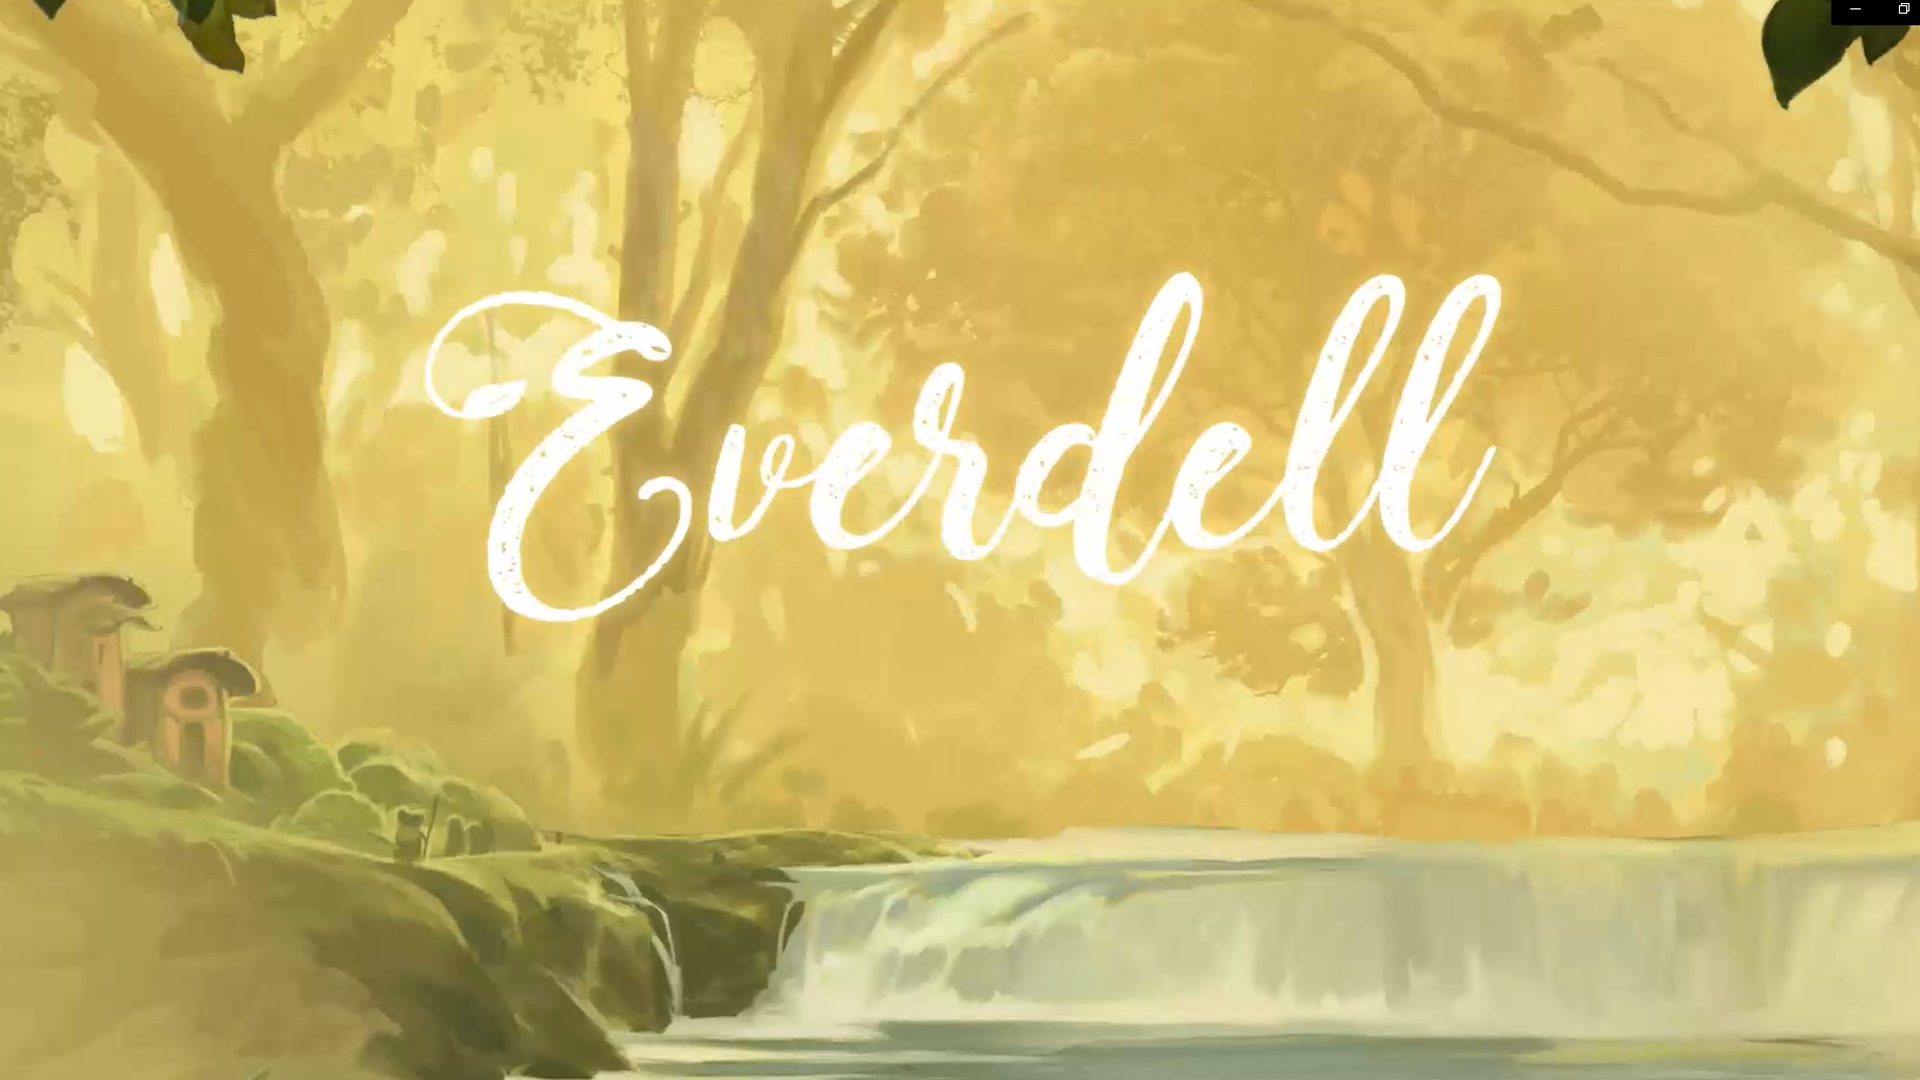 Everdell - Starling Game And Dire Wolf Digital